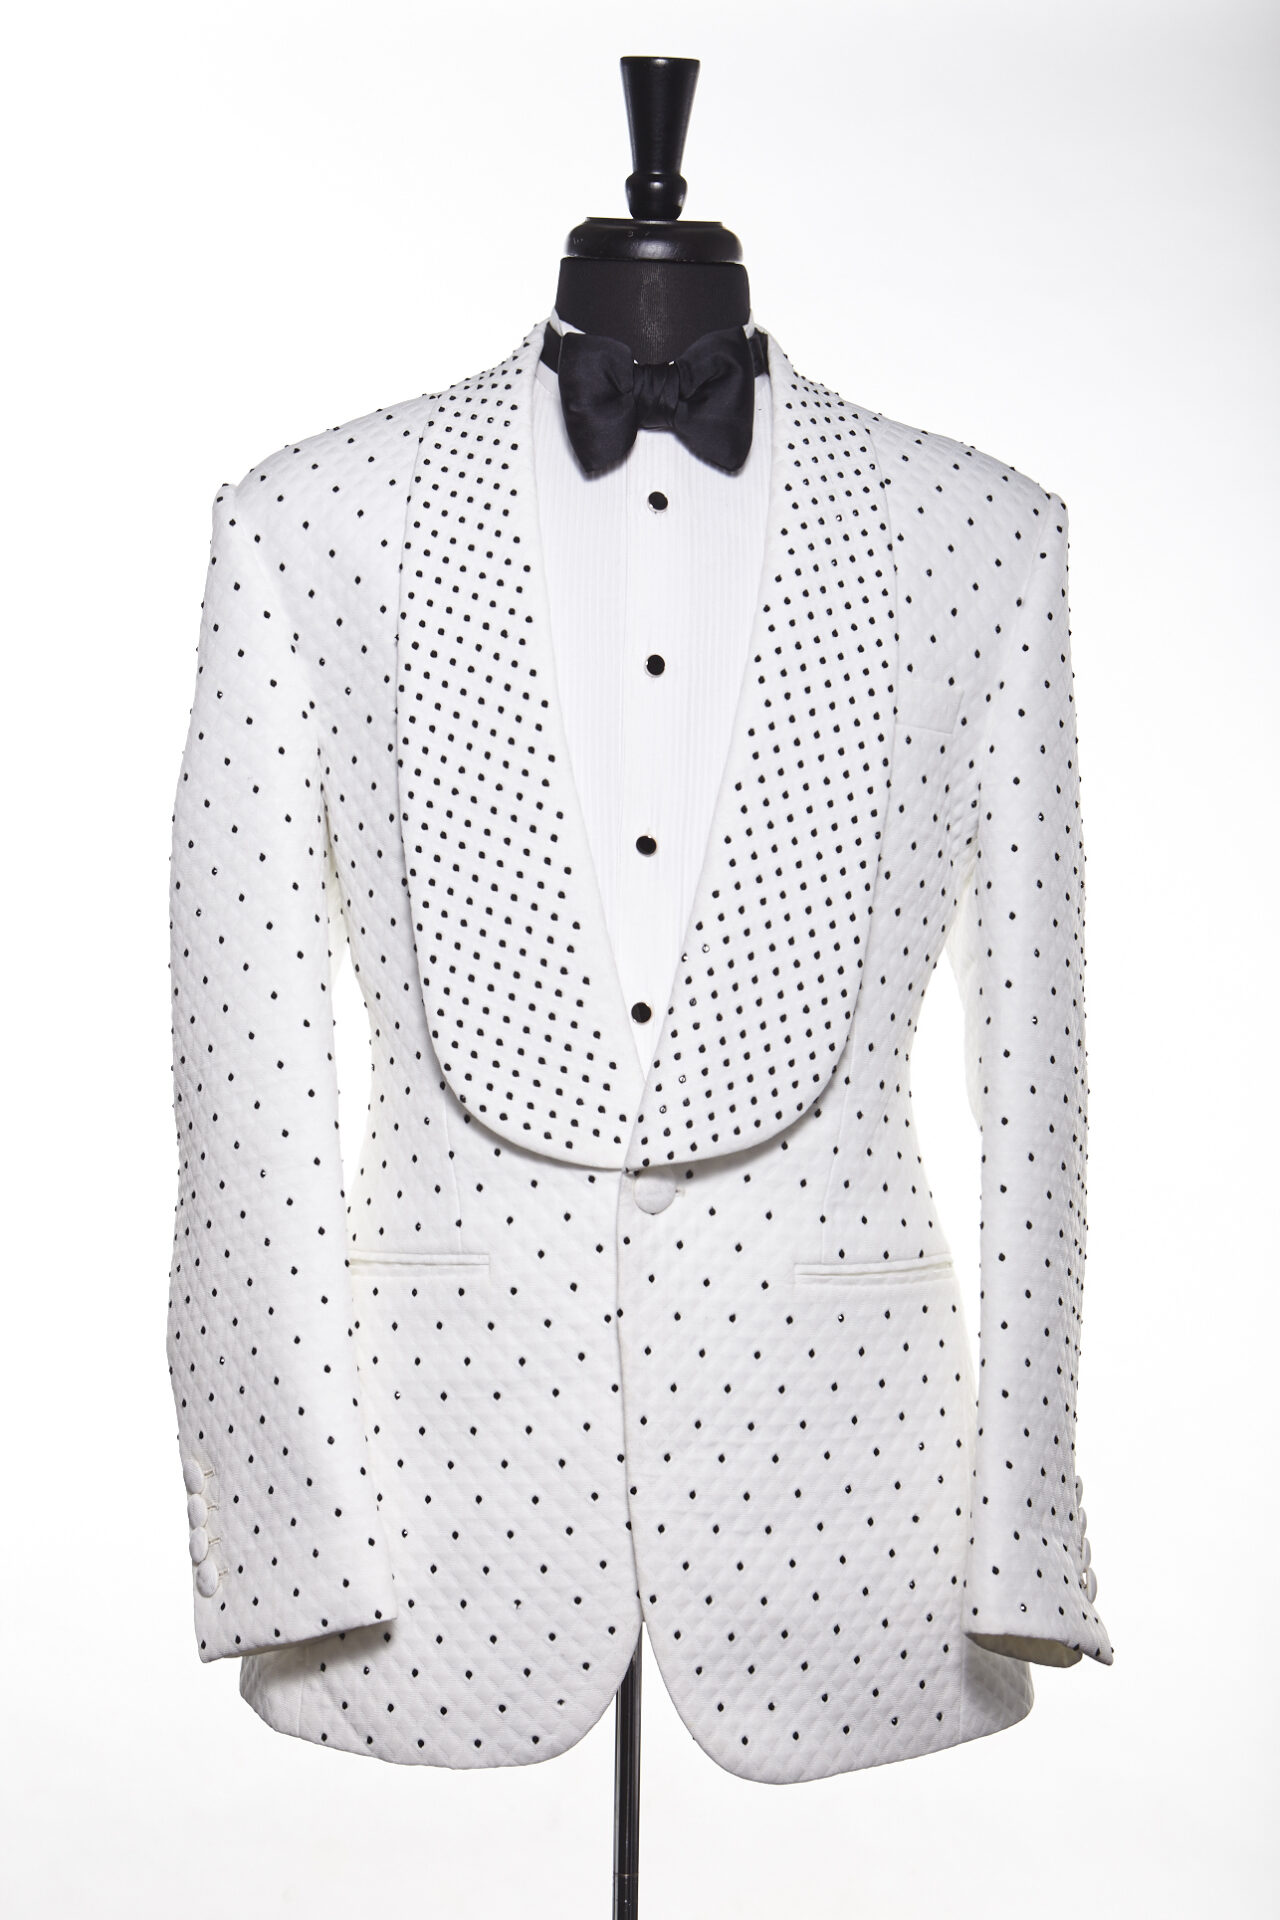 WHITE JACQUARD TUXEDO WITH DOTTED BLACK EMBROIDERED RHINESTONE SUIT ...